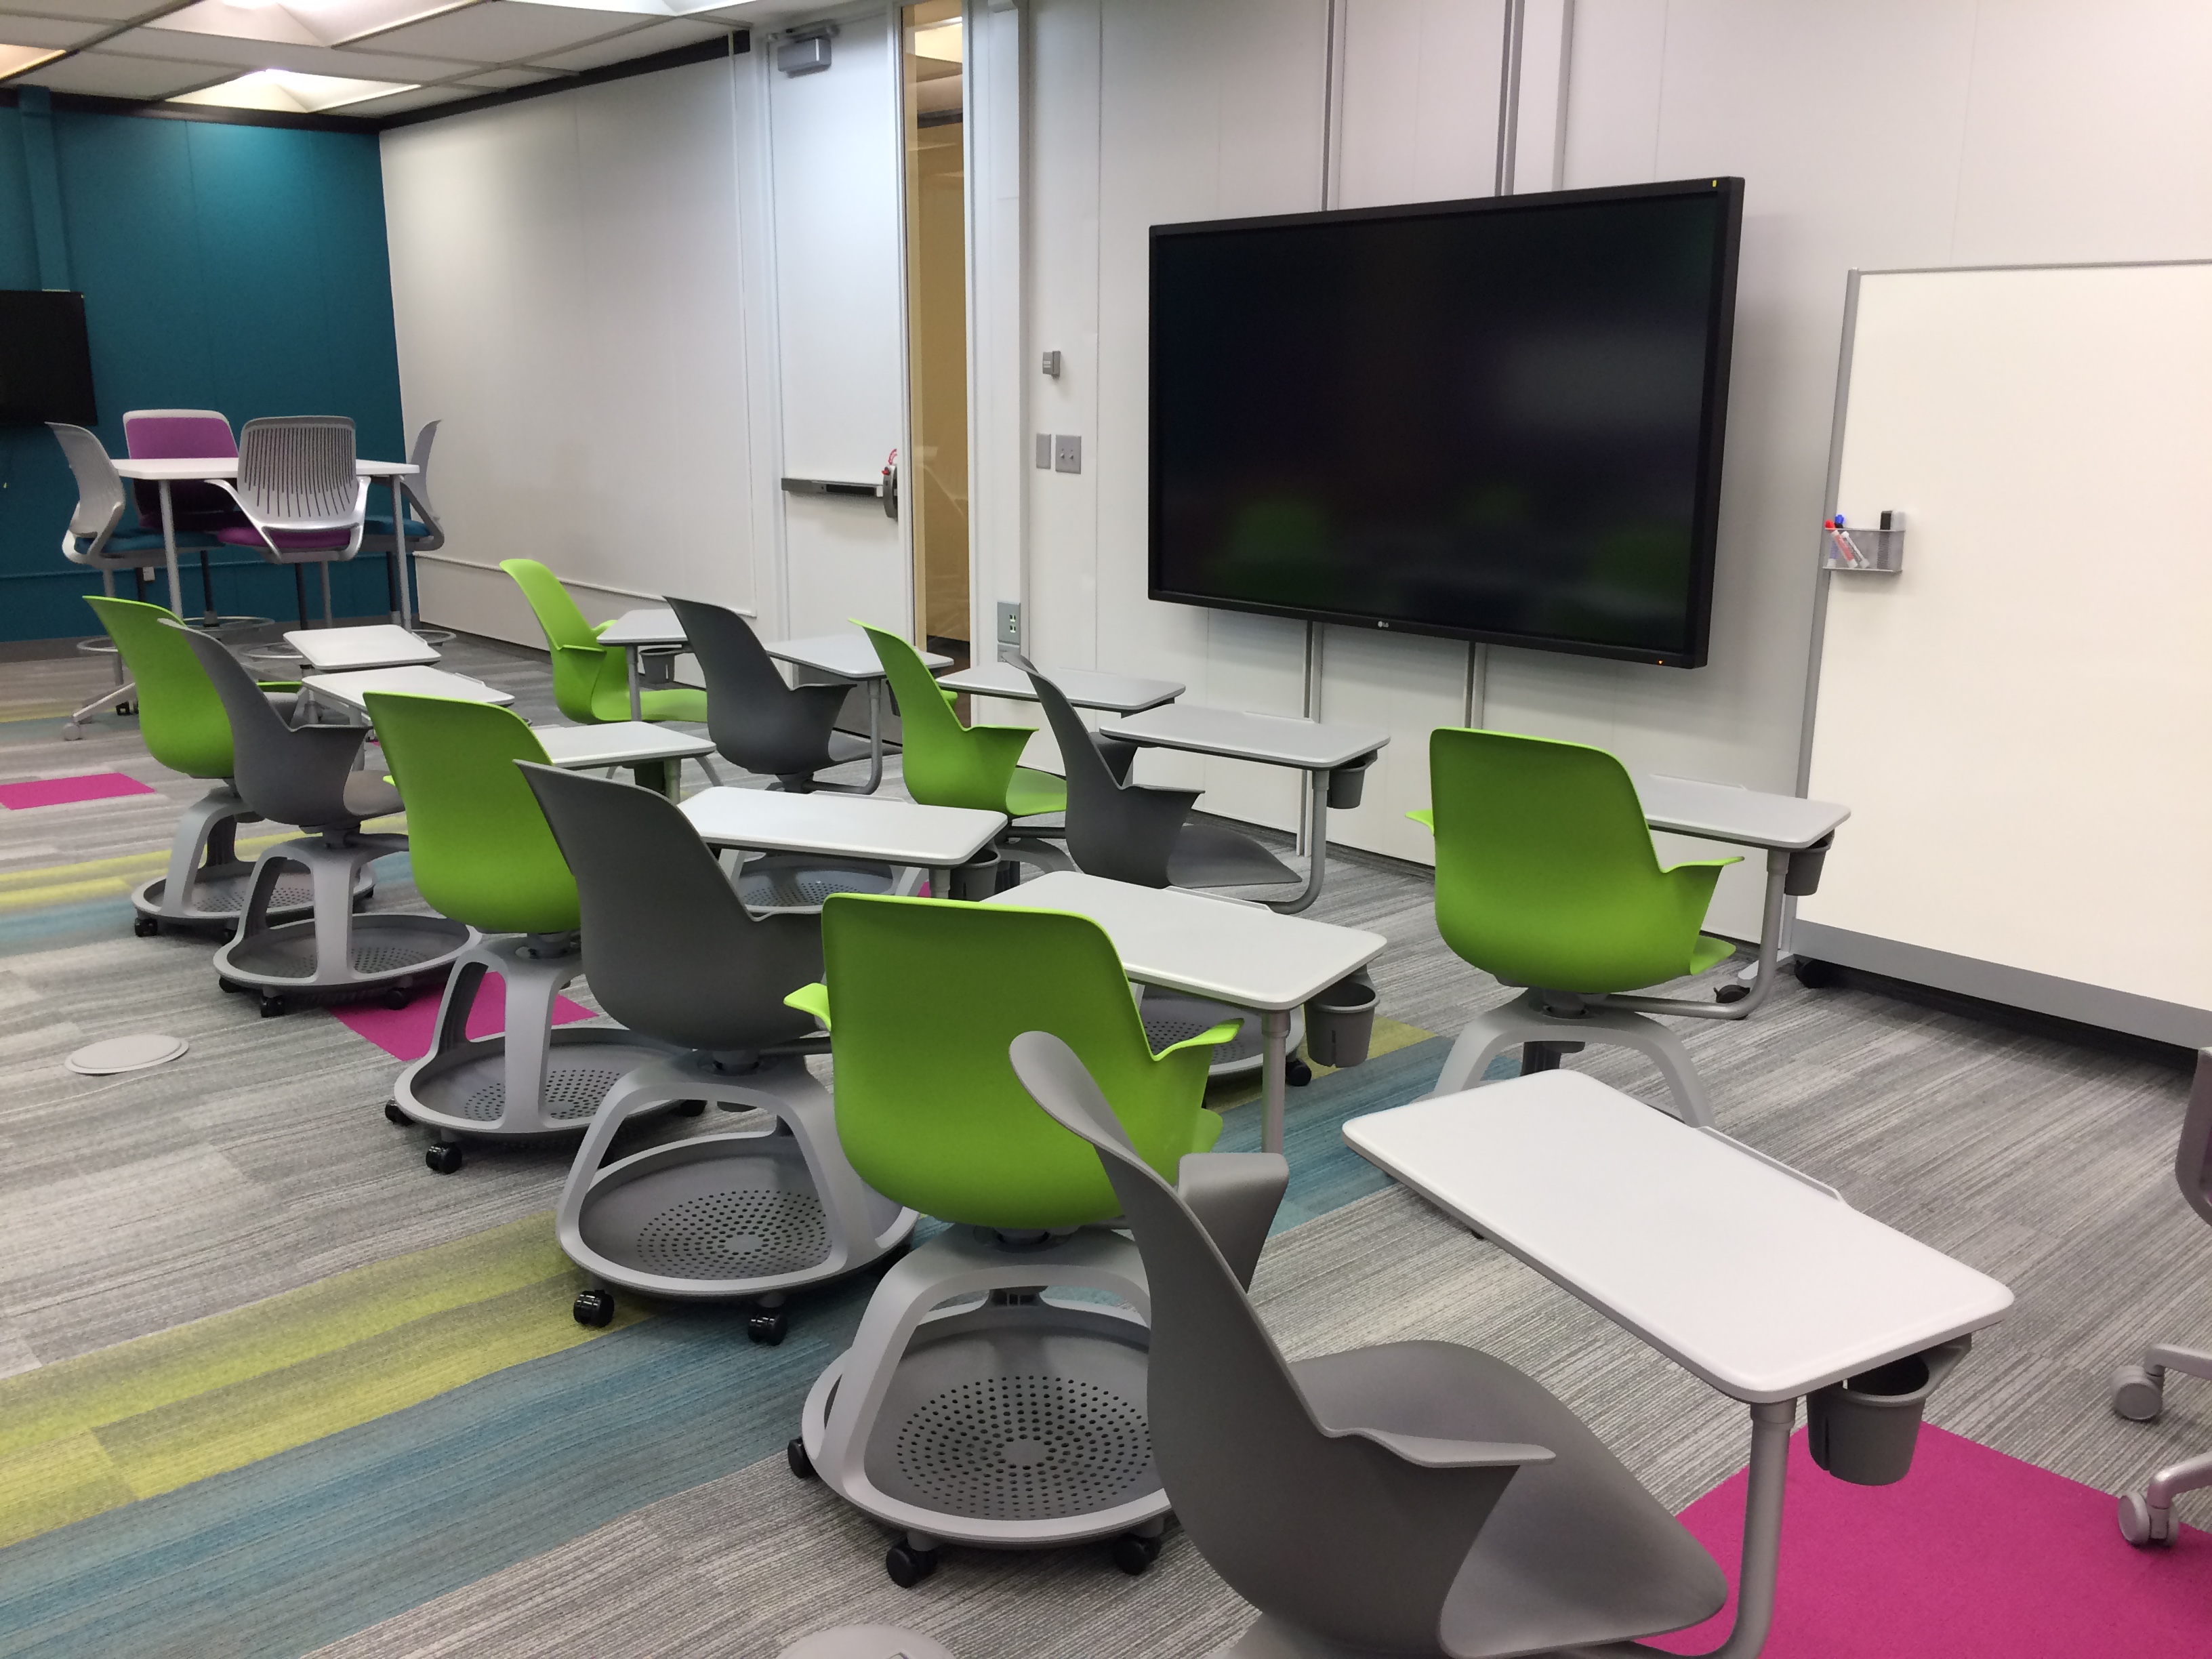 Photo of the active learning classroom